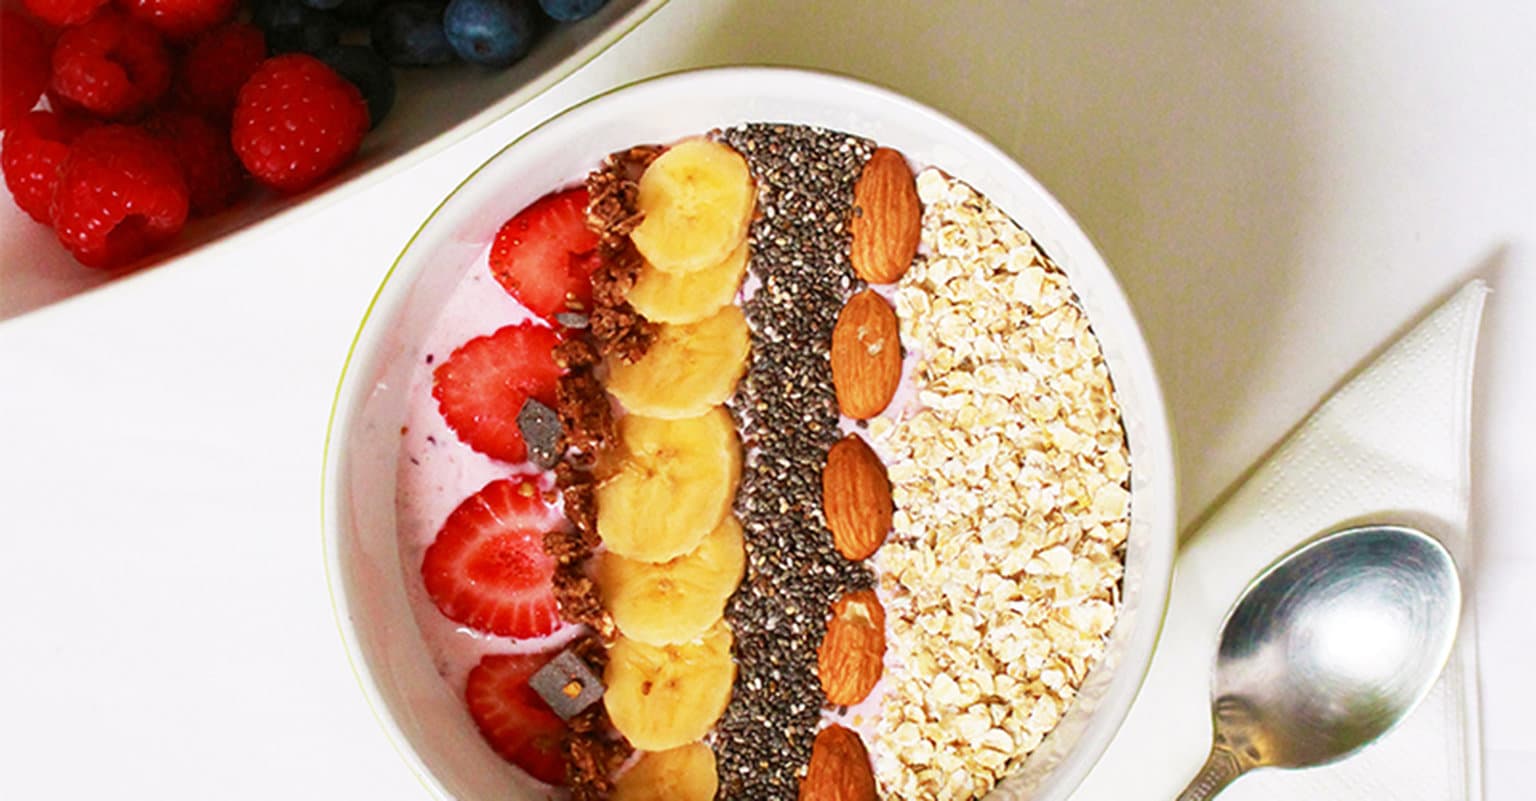 Healthy chia pudding recipe for a morning energy boost.